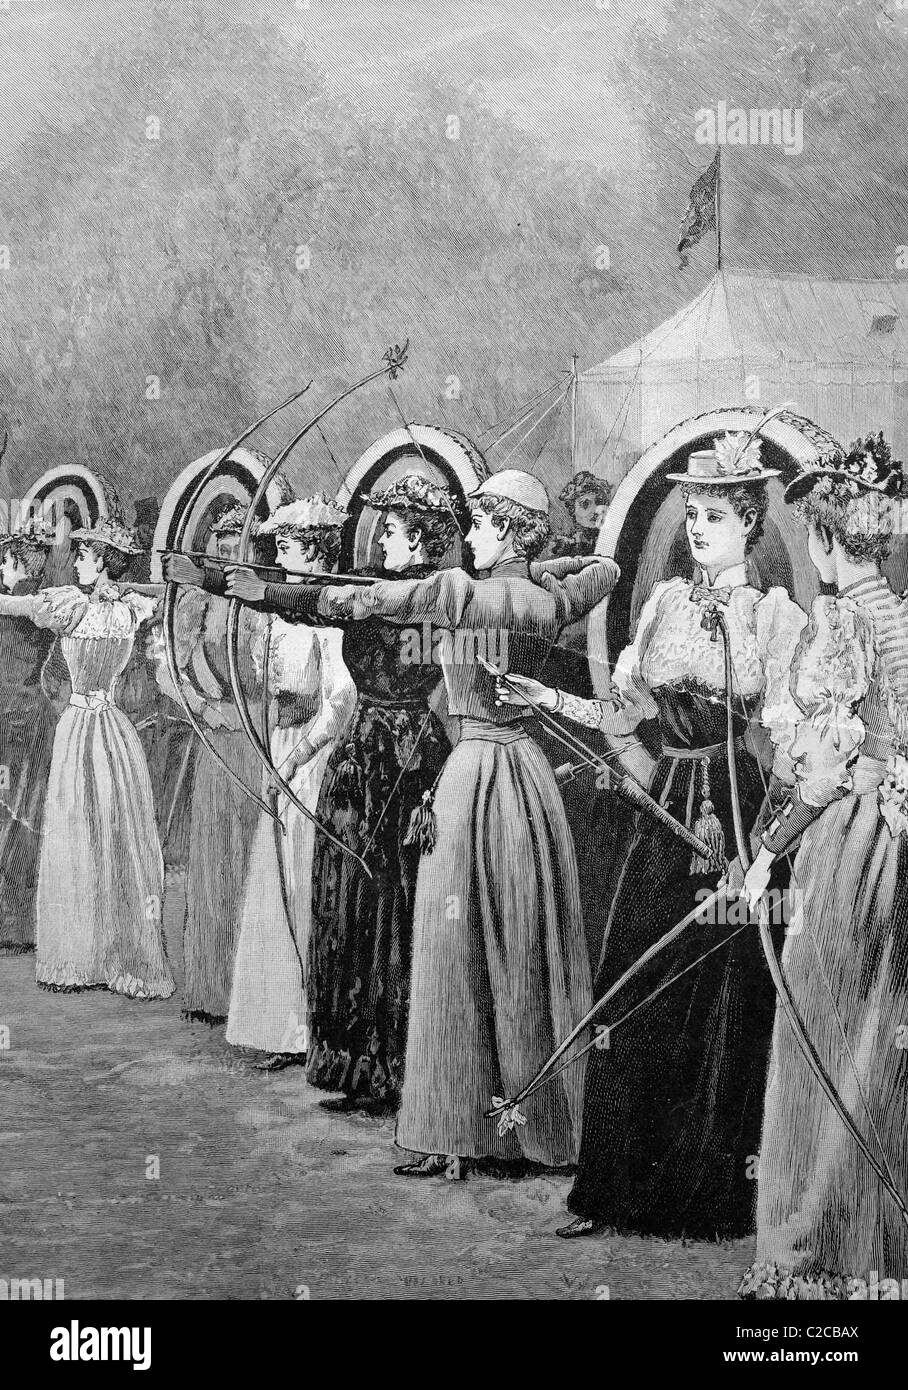 Women's competition in archery in Regent Park in London, England, historical illustration, ca. 1893 Stock Photo